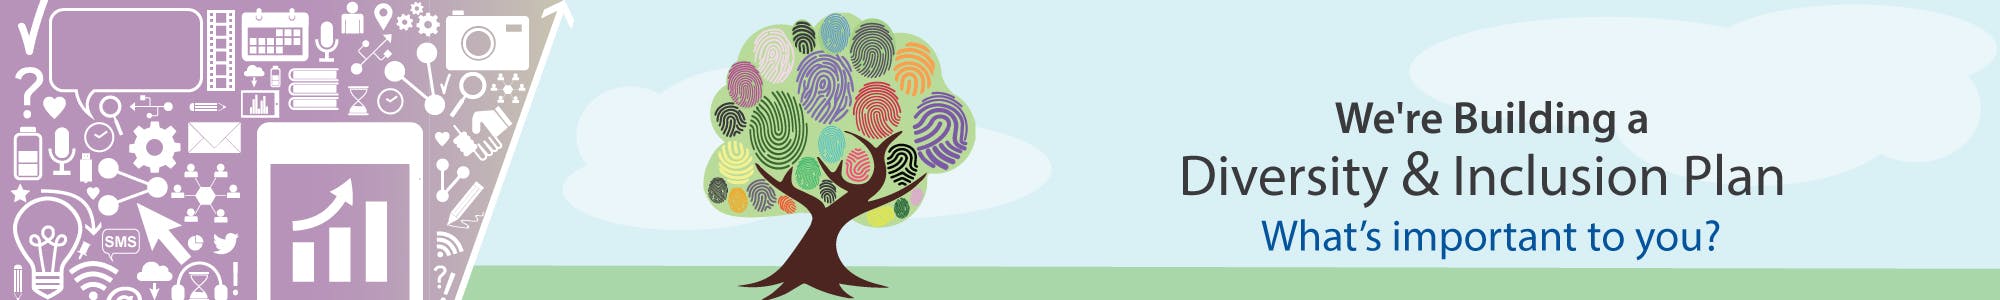 We're building a diversity and inclusion plan. Image features a tree with finger prints for the leaves and branches. 